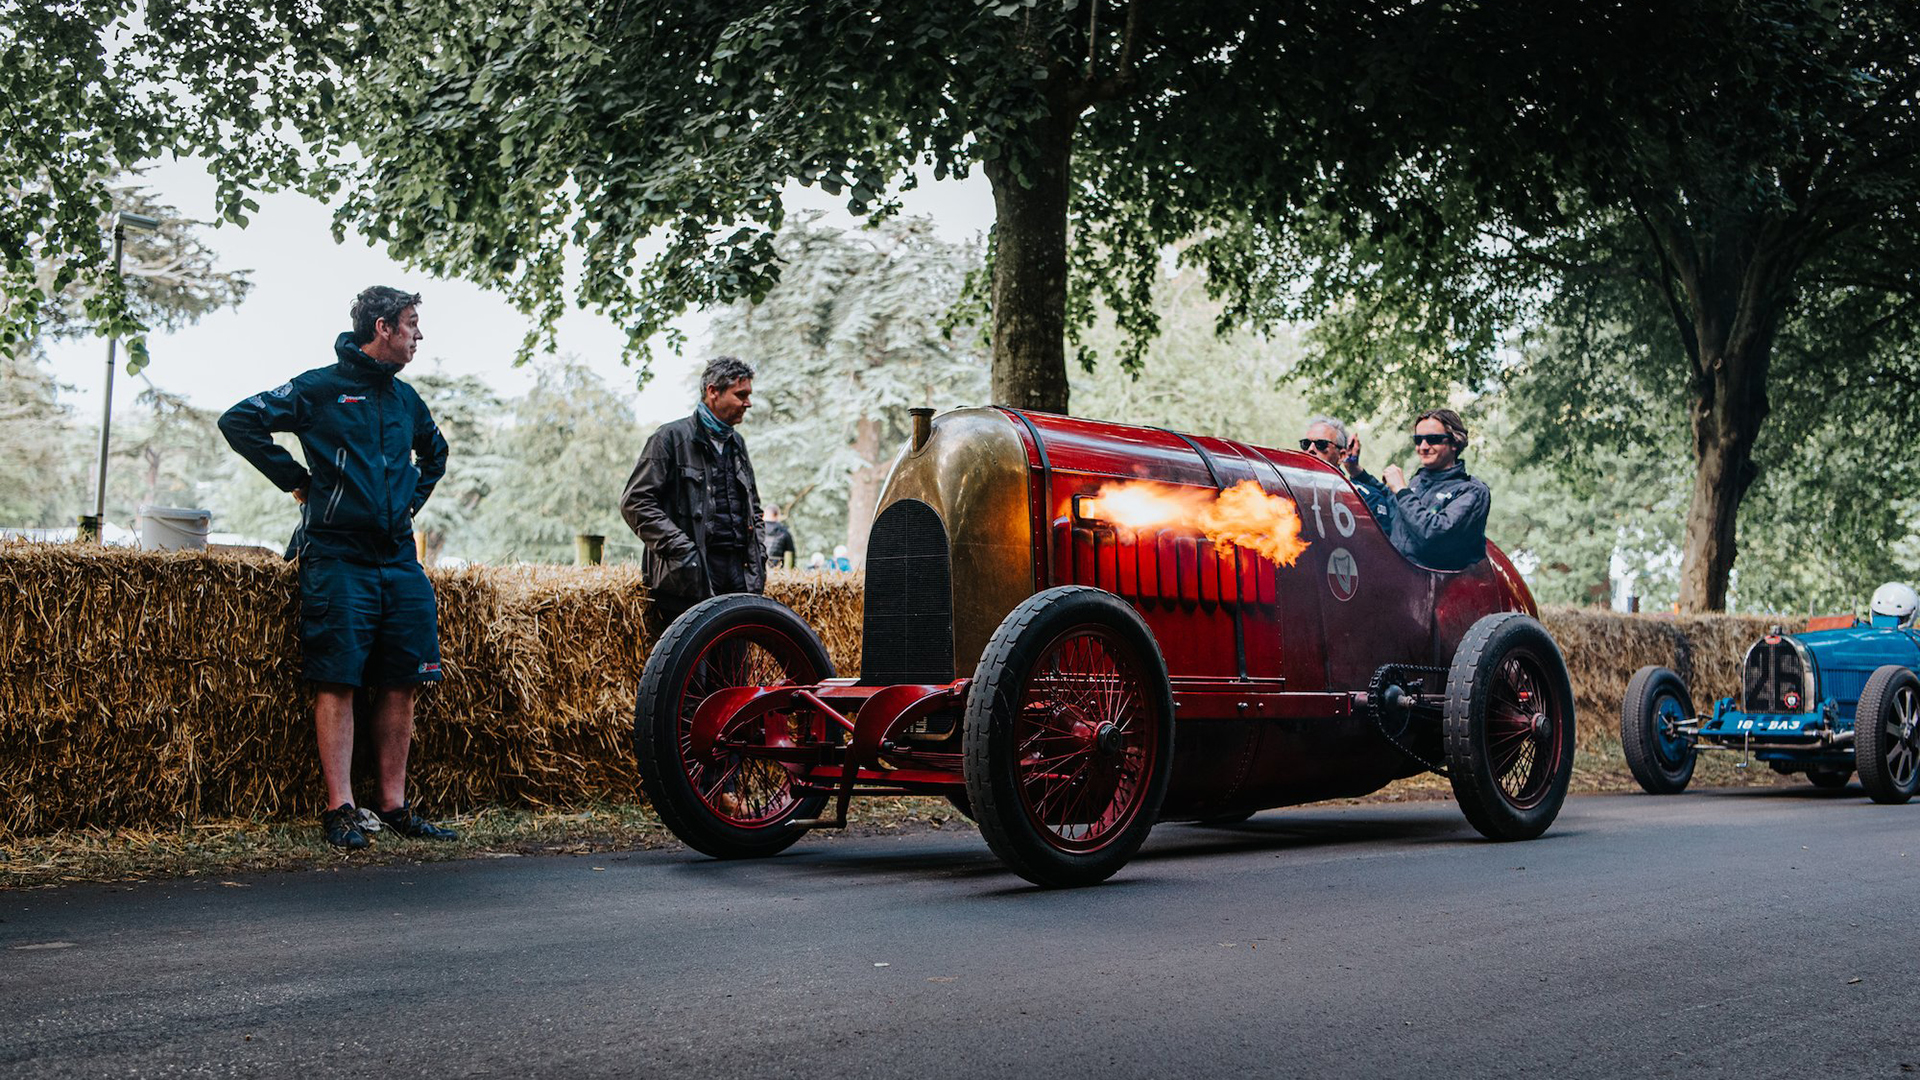 Early 20th Century Machines (@fosgoodwood)